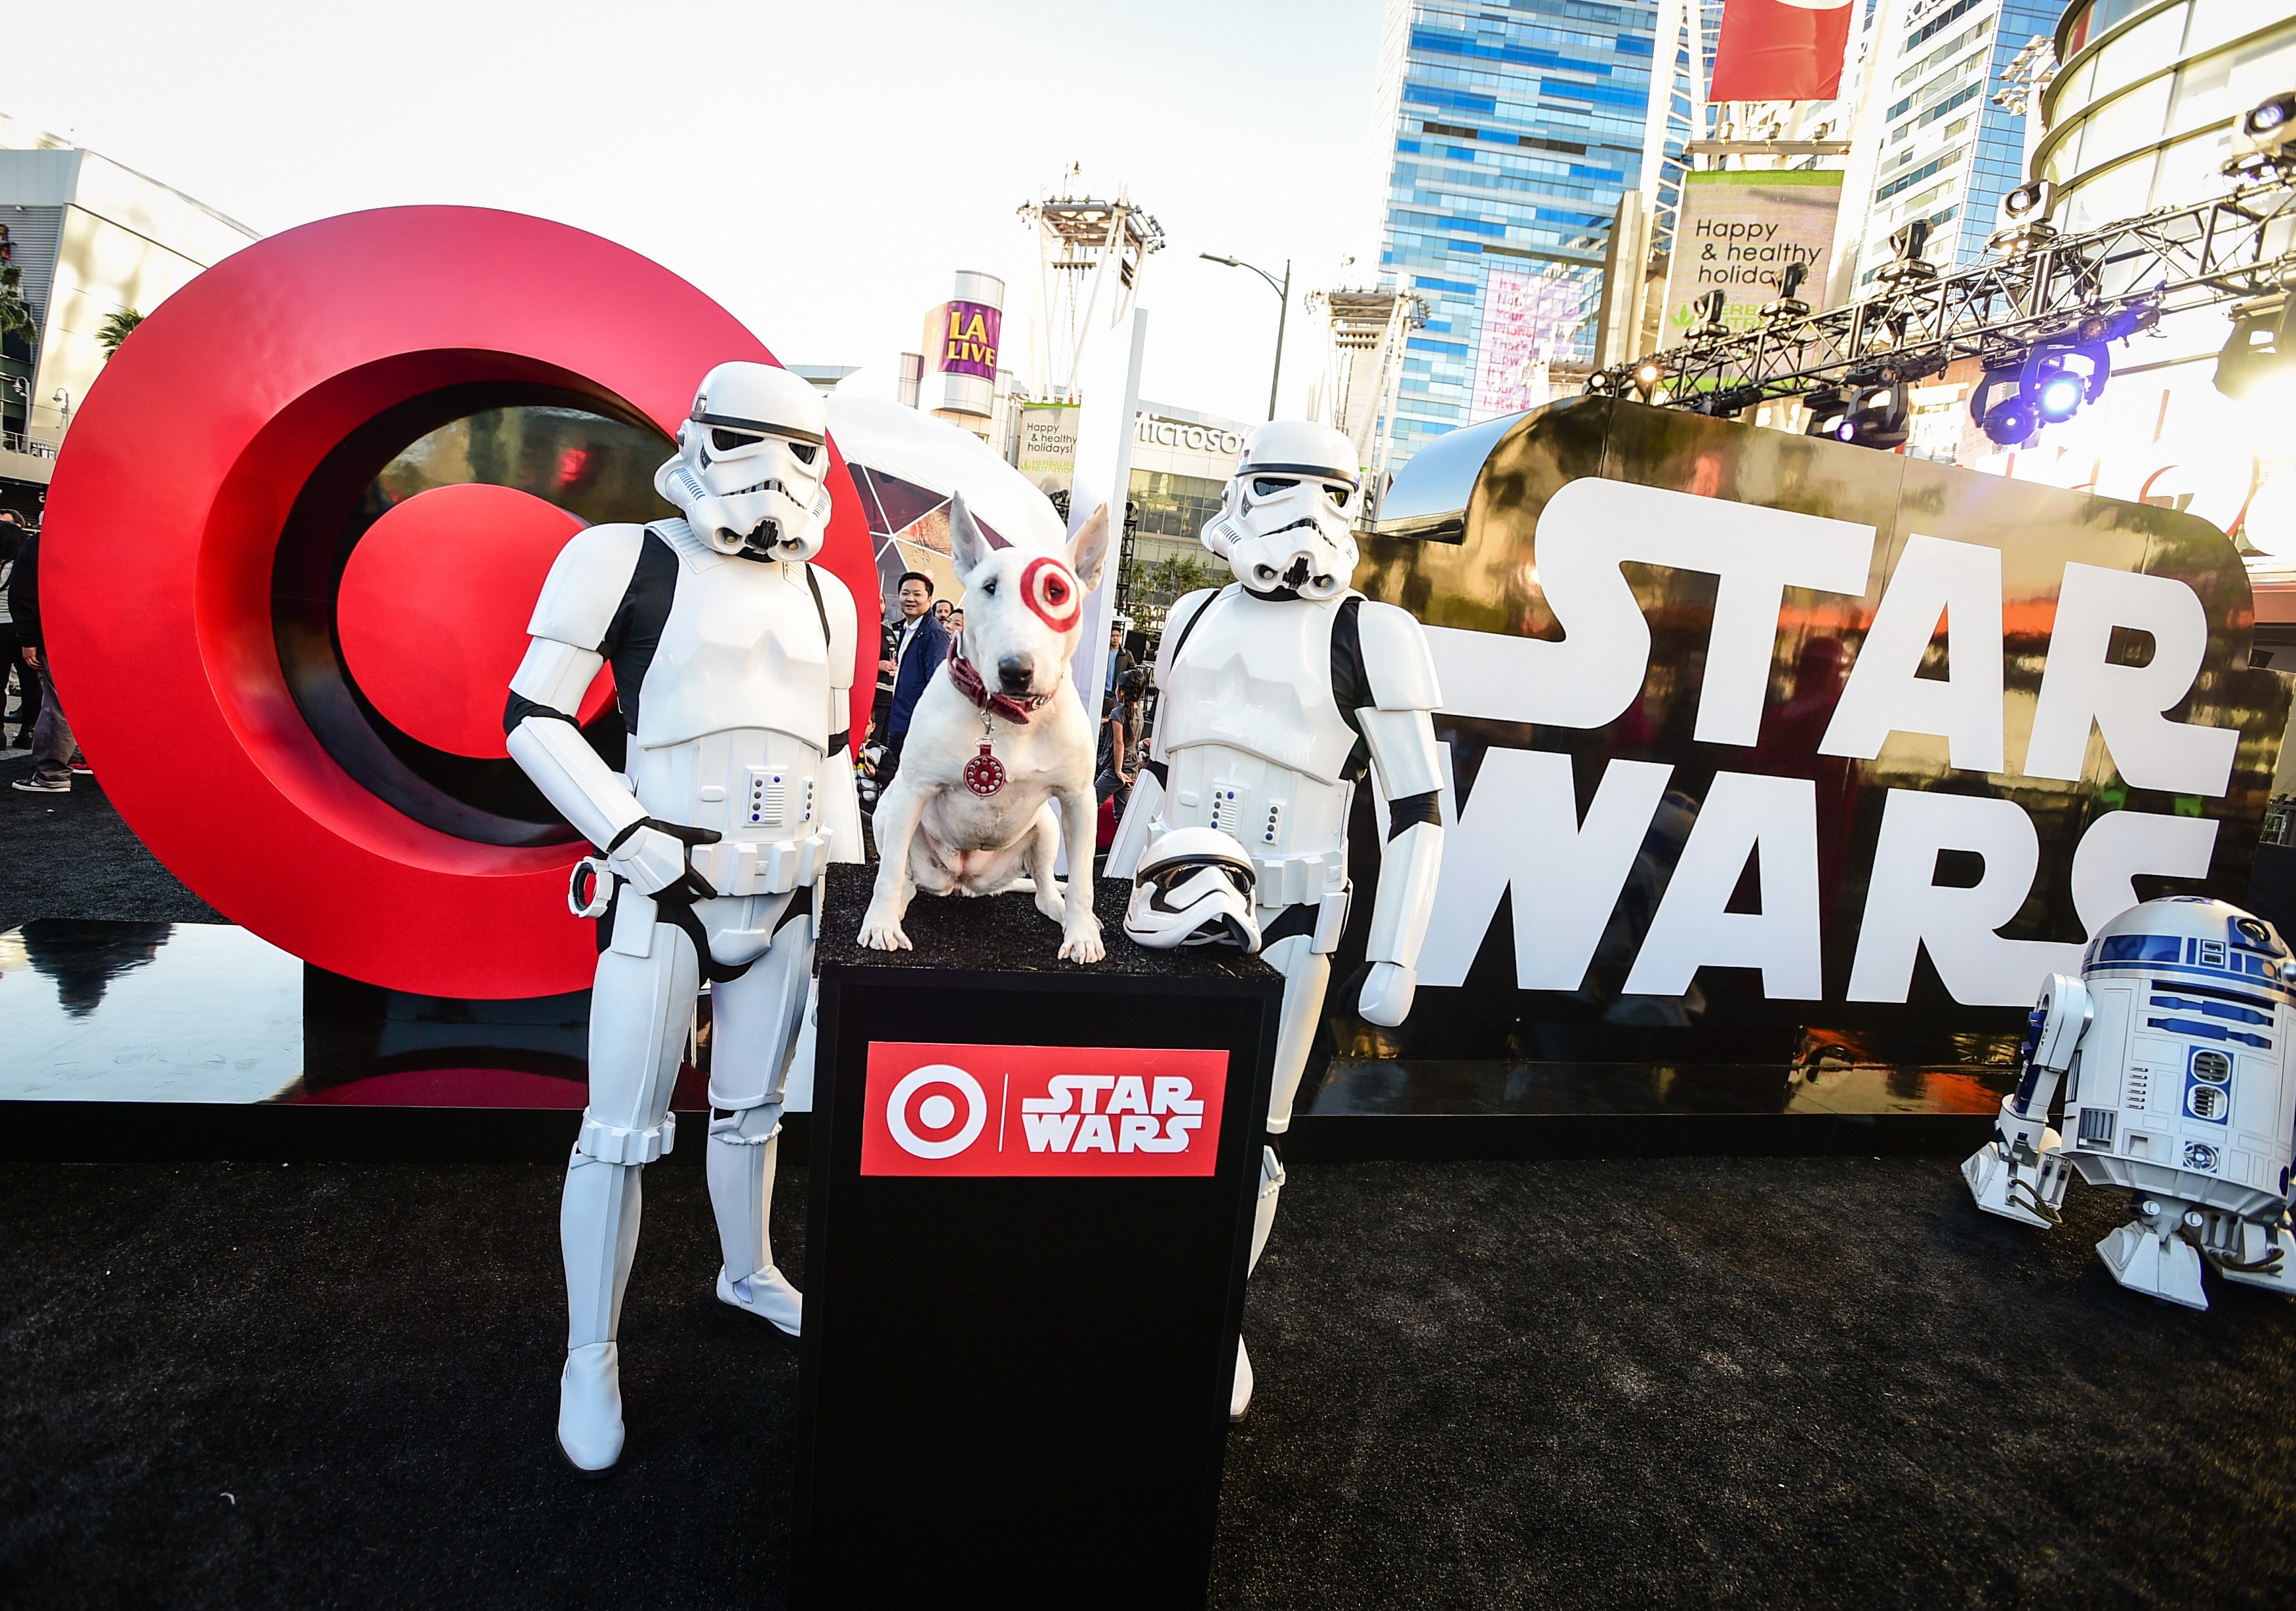 Dear Brands: Star Wars Is Not The Answer - Full Contact Advertising